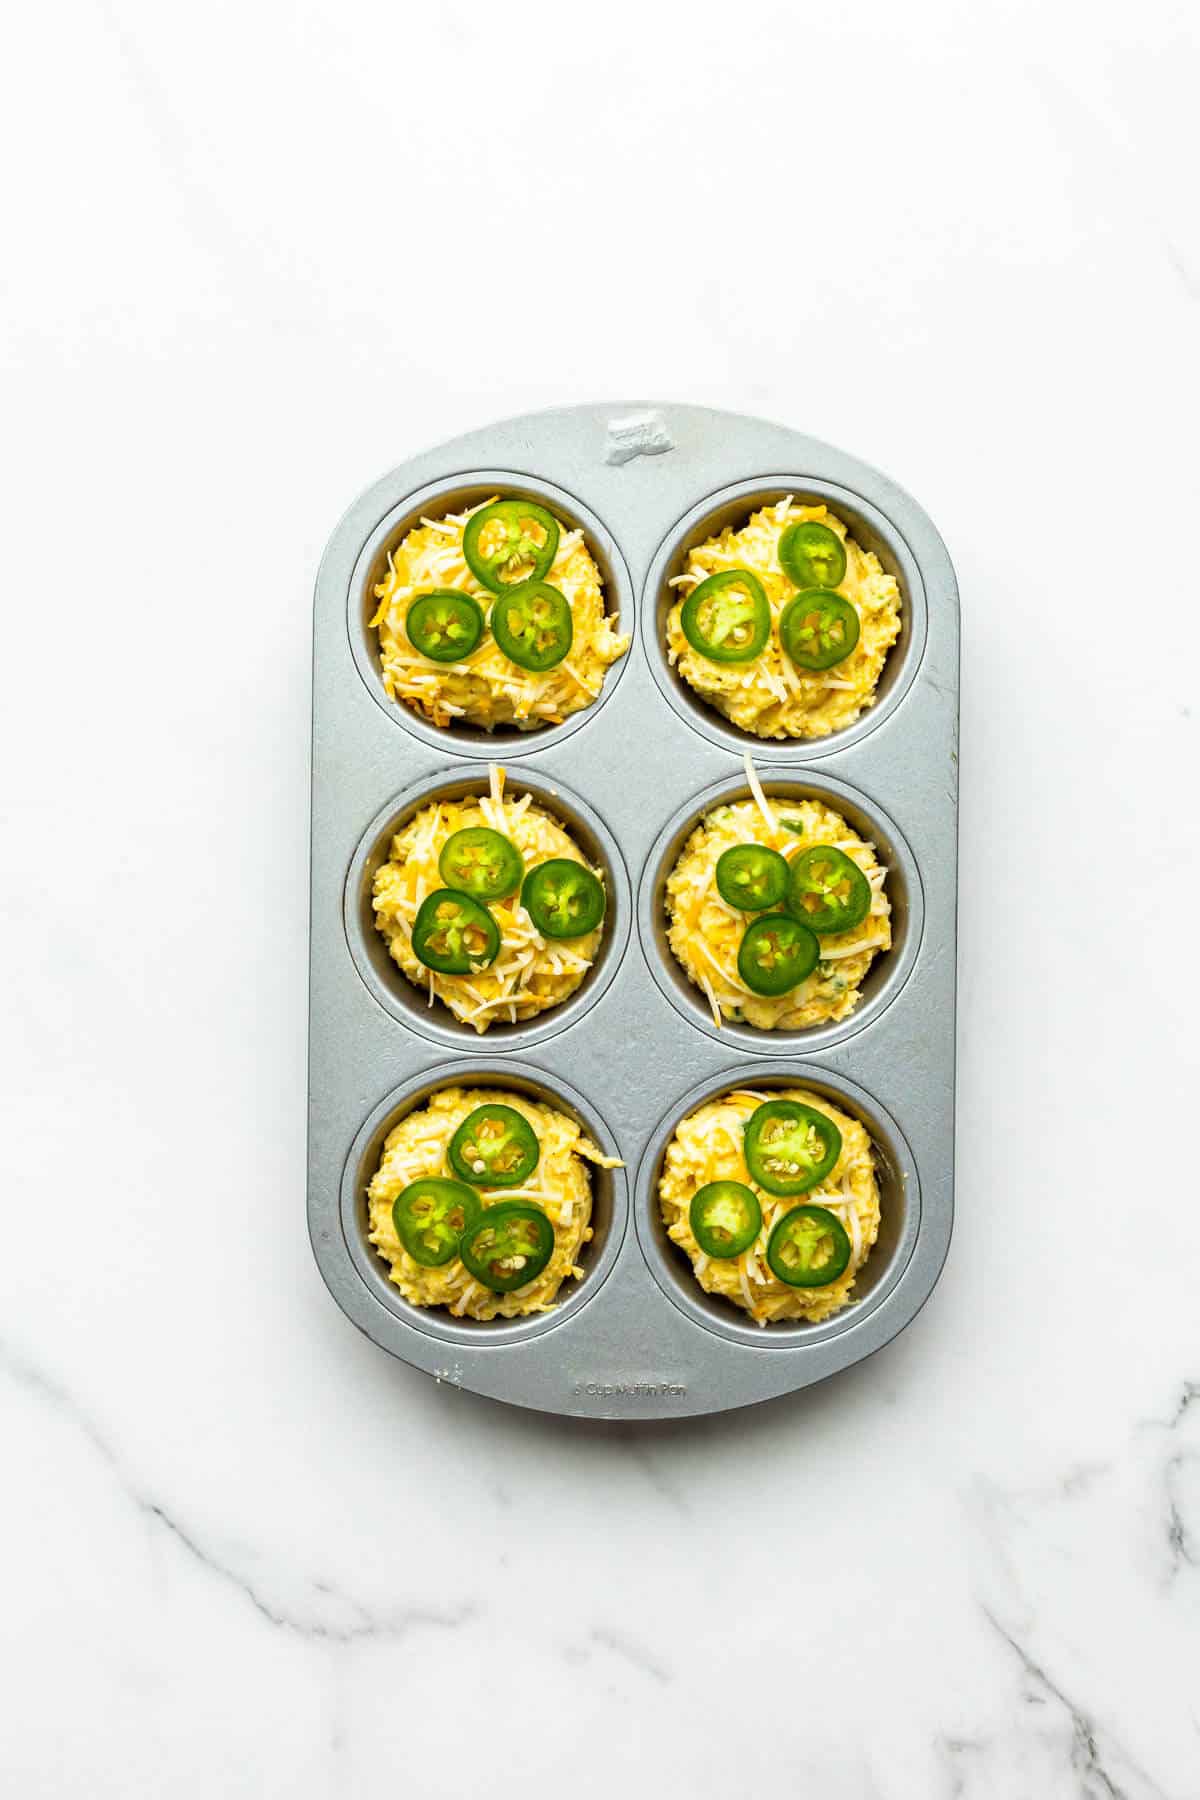 Jalapeño cheddar cornbread muffins before baking in a 6-cup muffin pan.